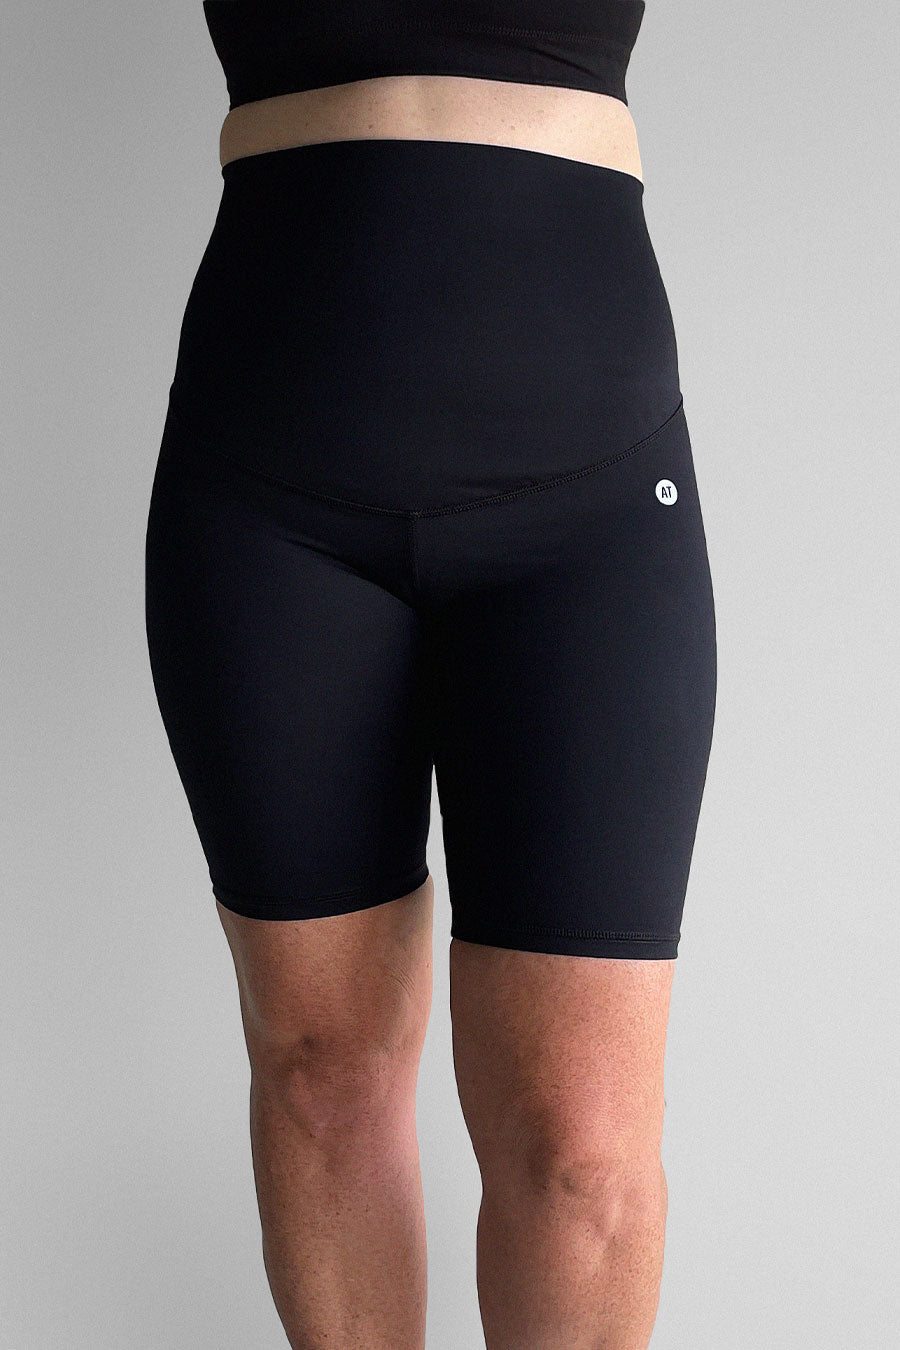 Endometriosis Support Bike Short - Black from Active Truth™
